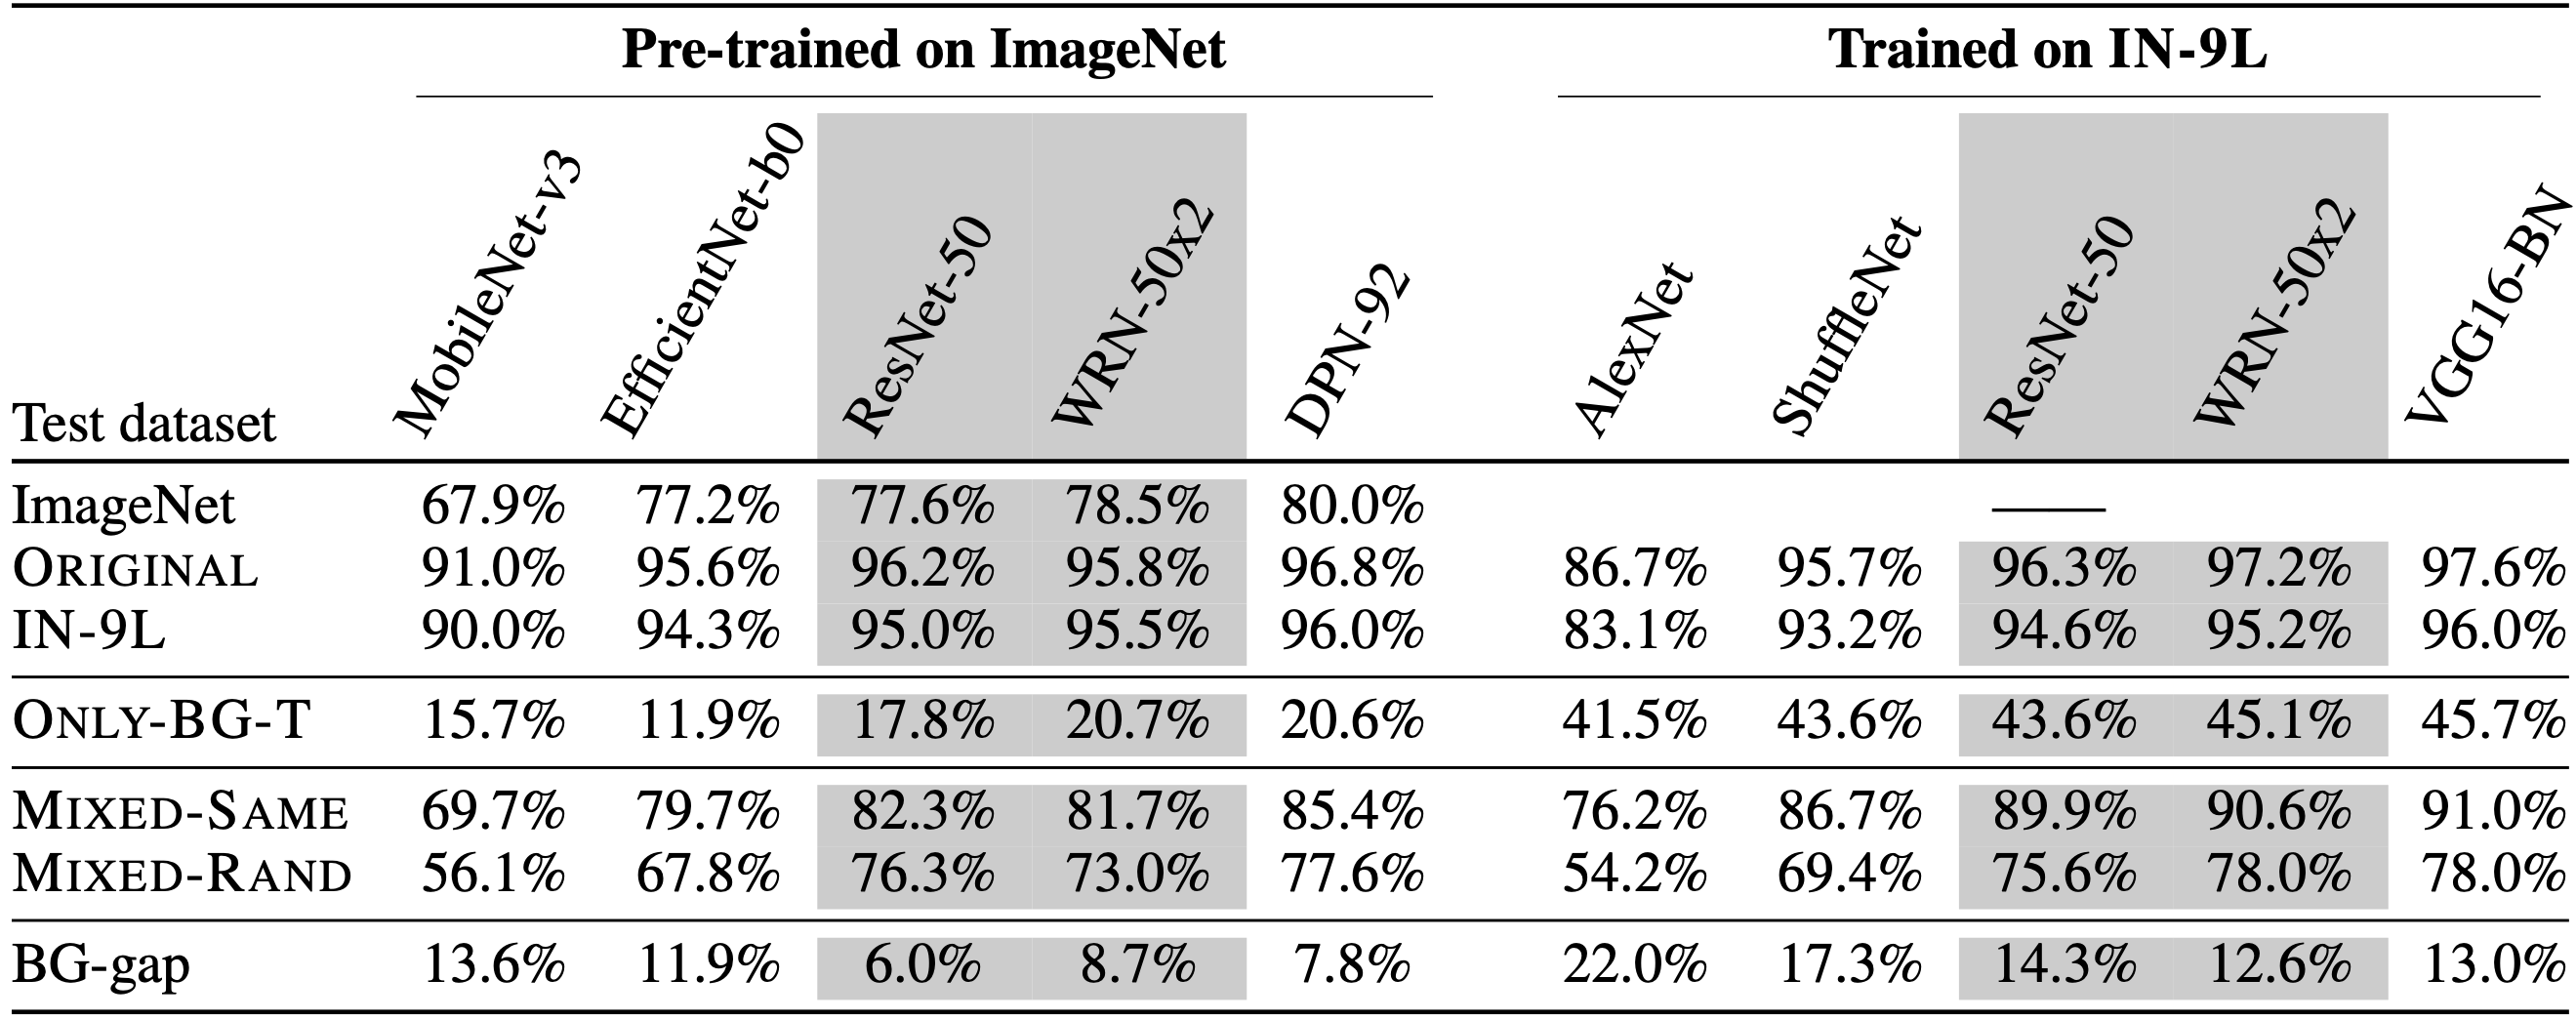 Evaluating pretrained models on Imagenet, Mixed-Rand, and Mixed-Same to compute the BG-Gap.